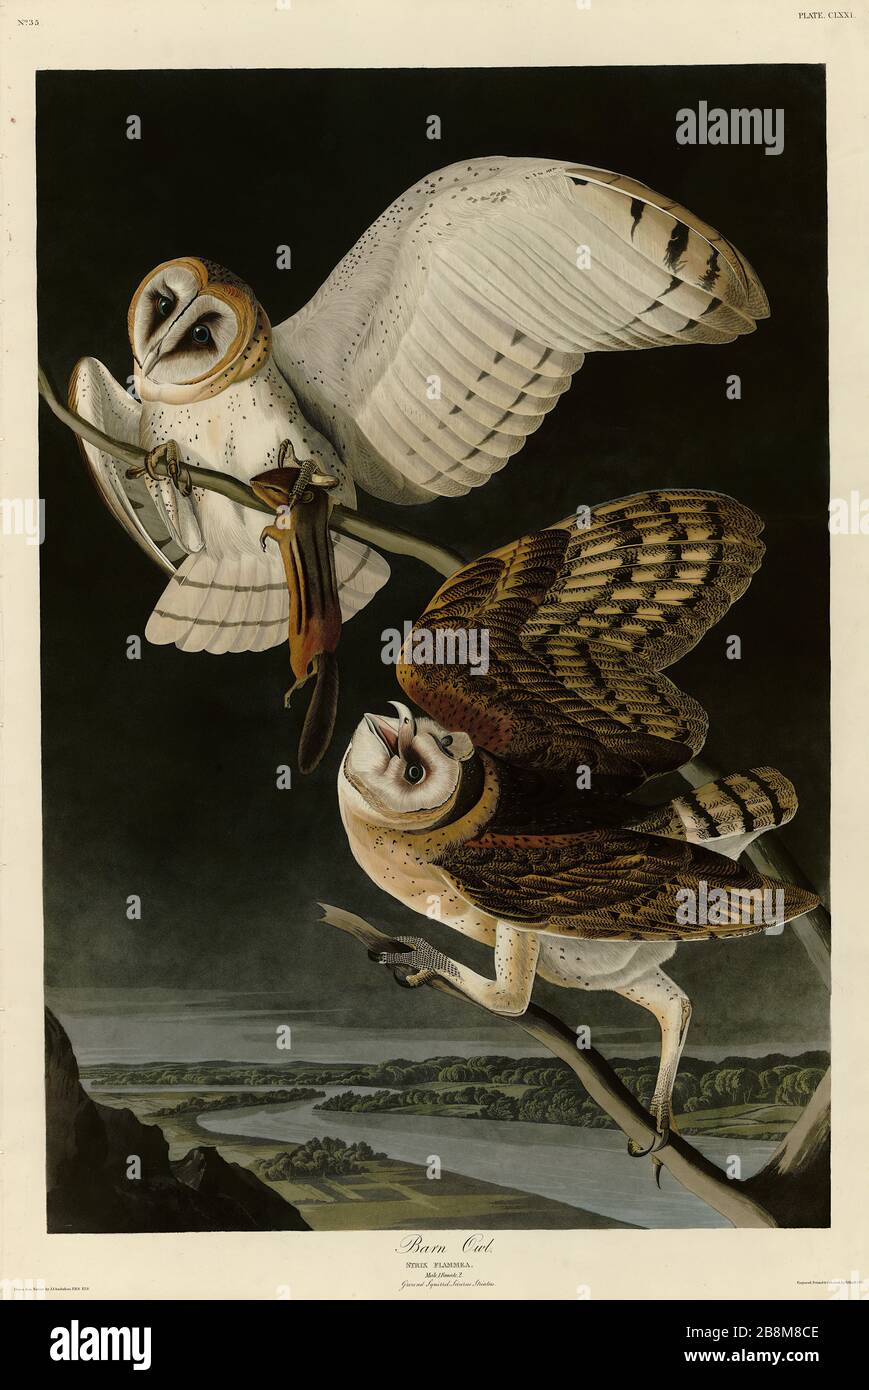 Plate 171 Barn Owl, from The Birds of America folio (1827–1839) by John James Audubon - Very high resolution and quality edited image Stock Photo